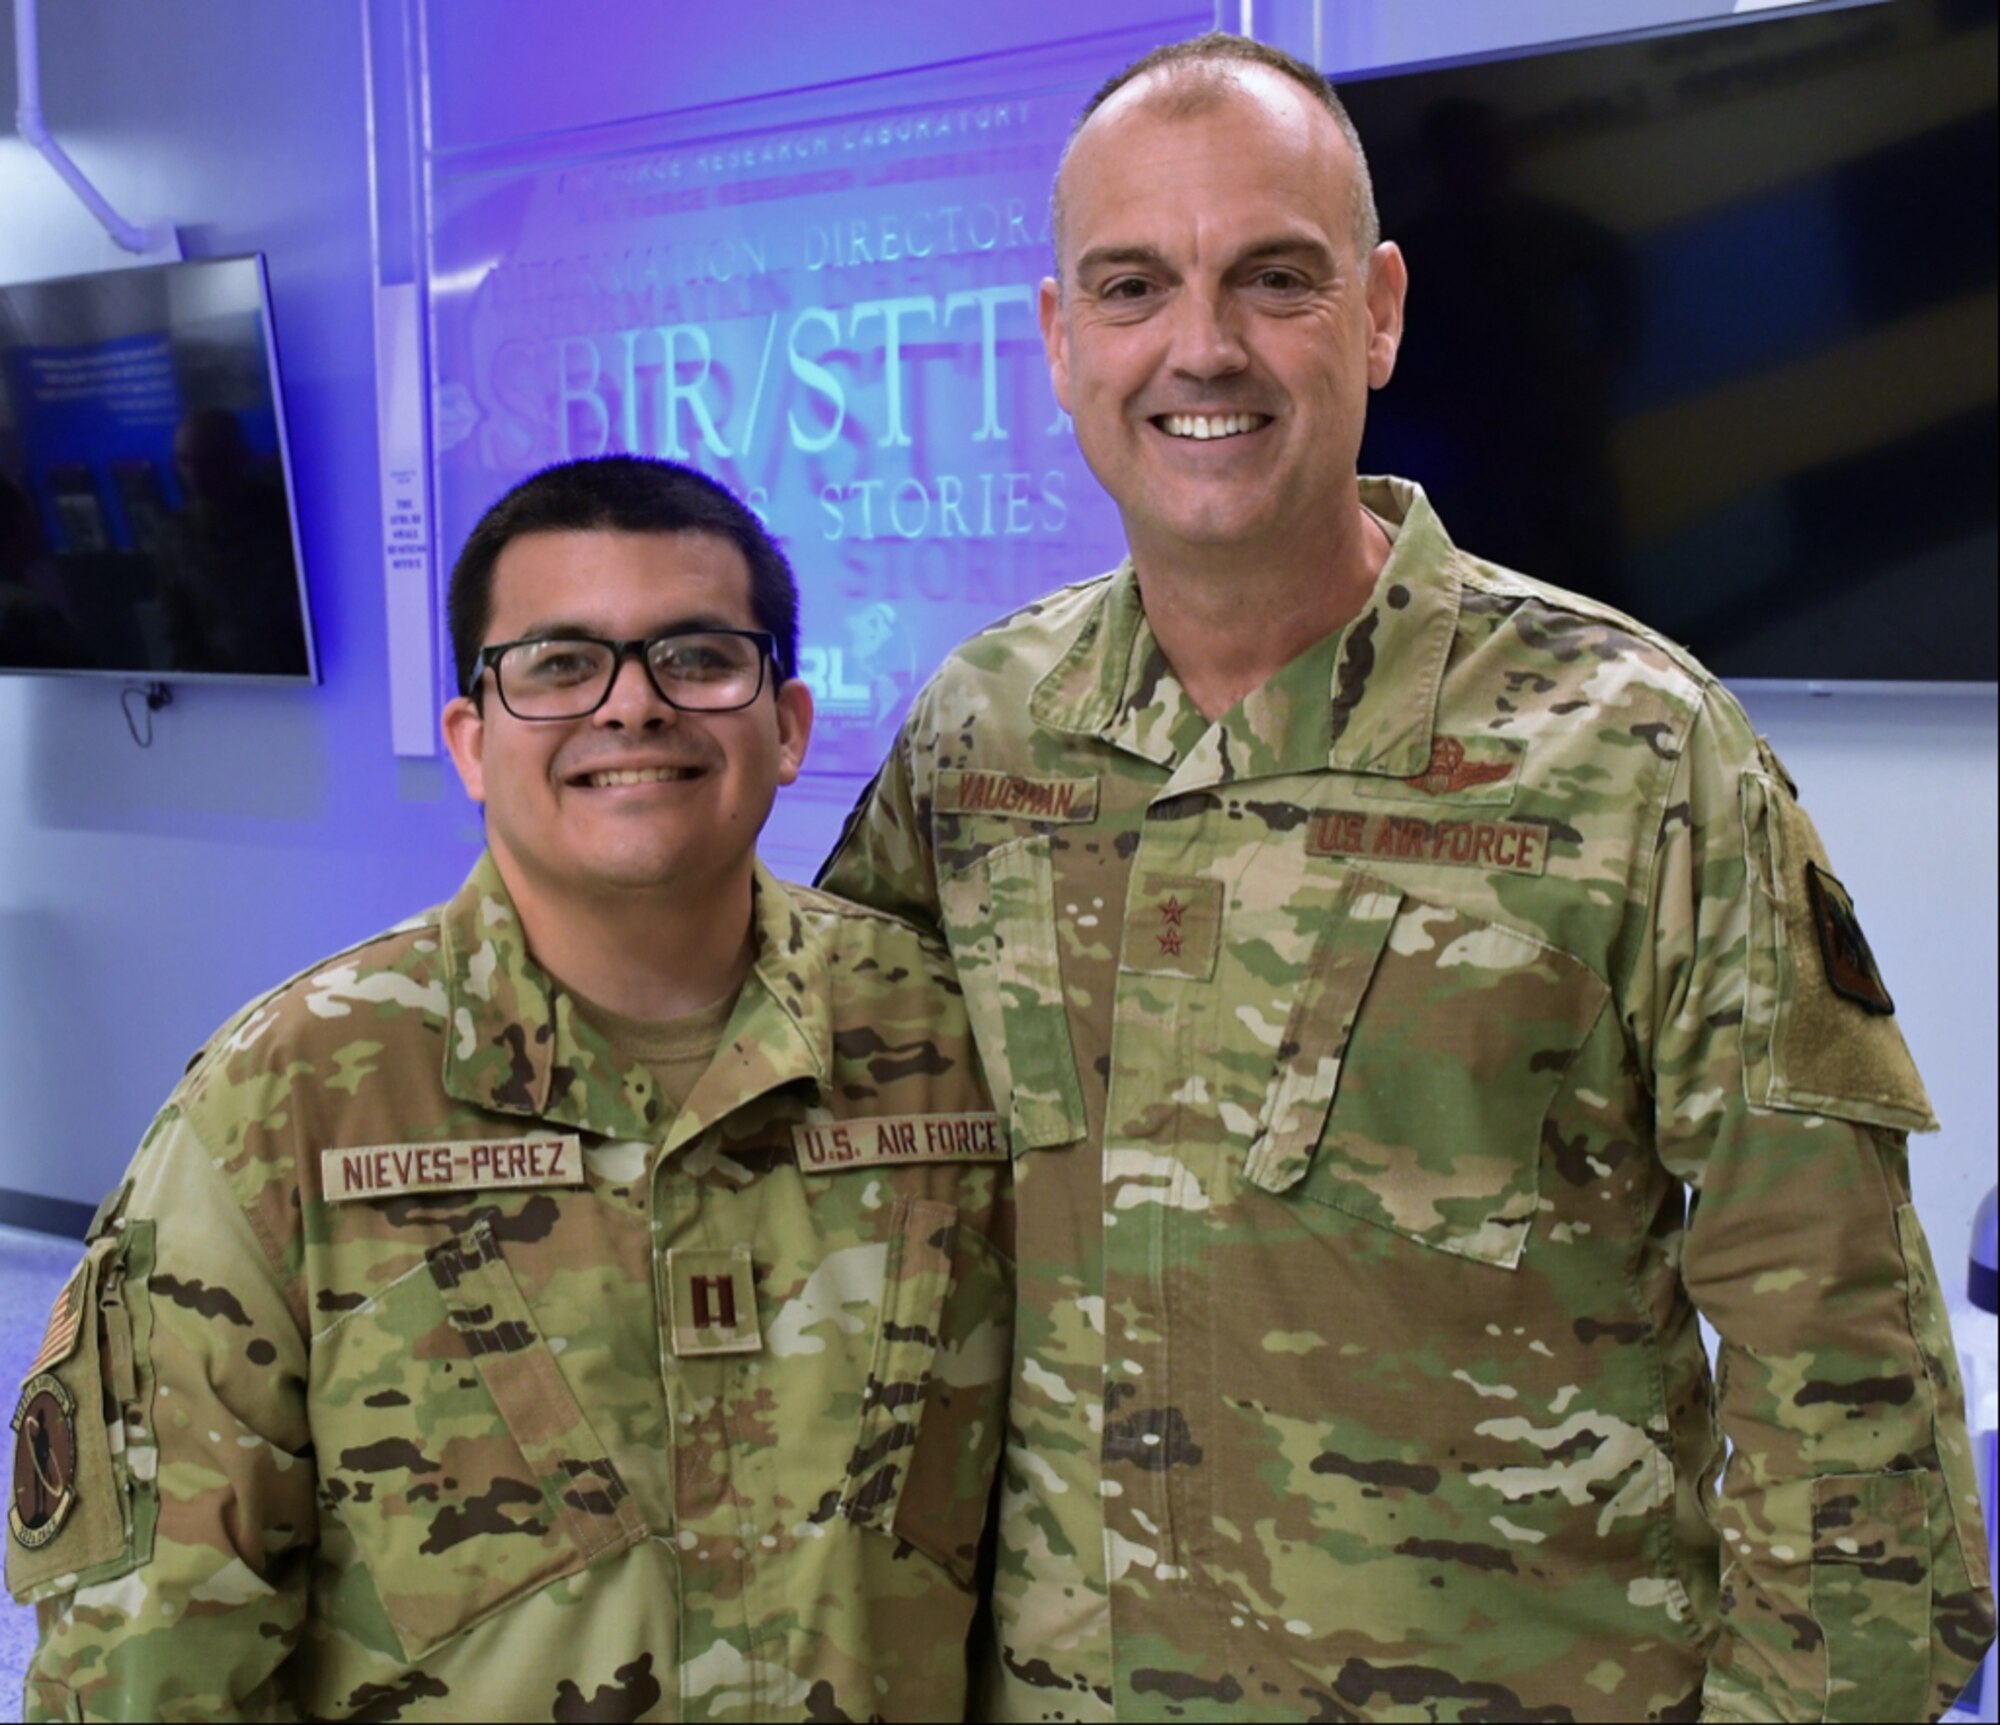 Air Force Major General Edward Vaughan, director of space operations for the National Guard Bureau, poses for a photo with Capt. Juan Carlos Nieves-Perez.